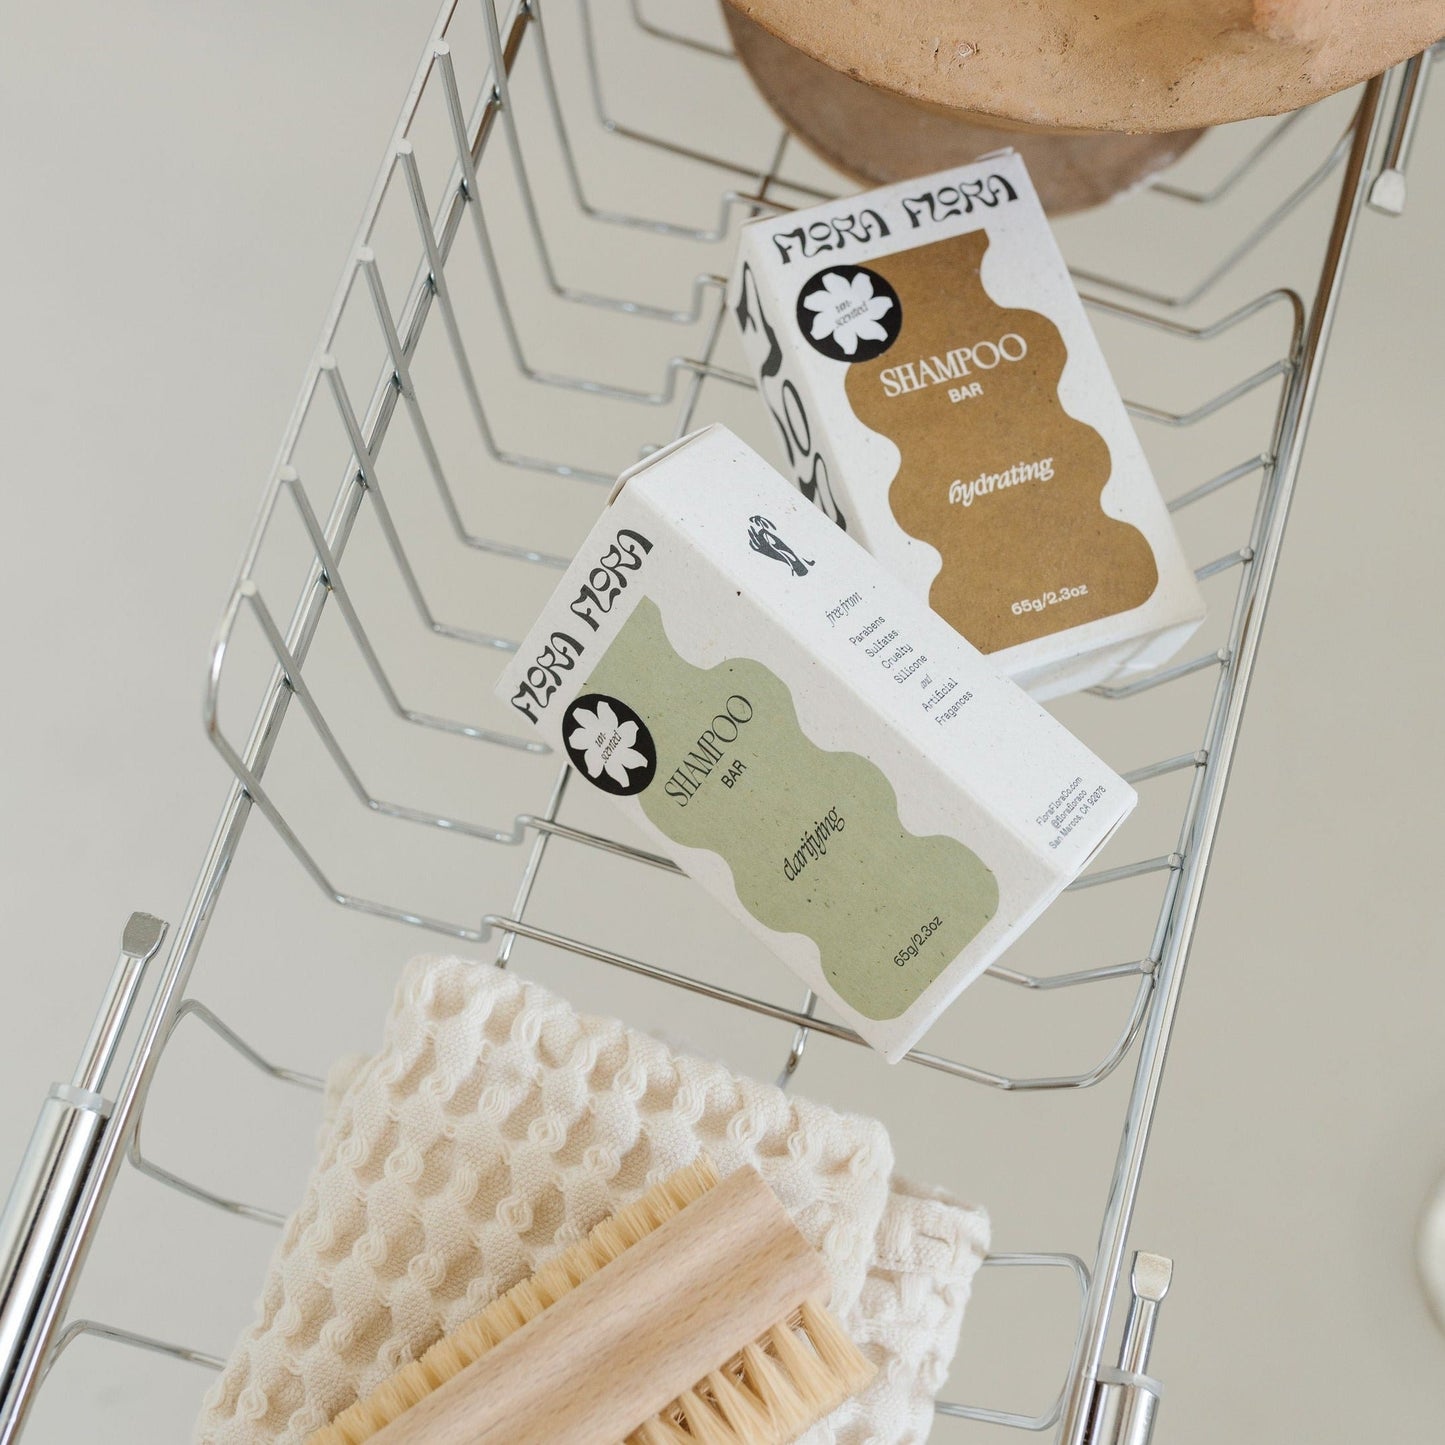 Flora Flora all natural hydrating and clarifying shampoo bar available at Rook & Rose.